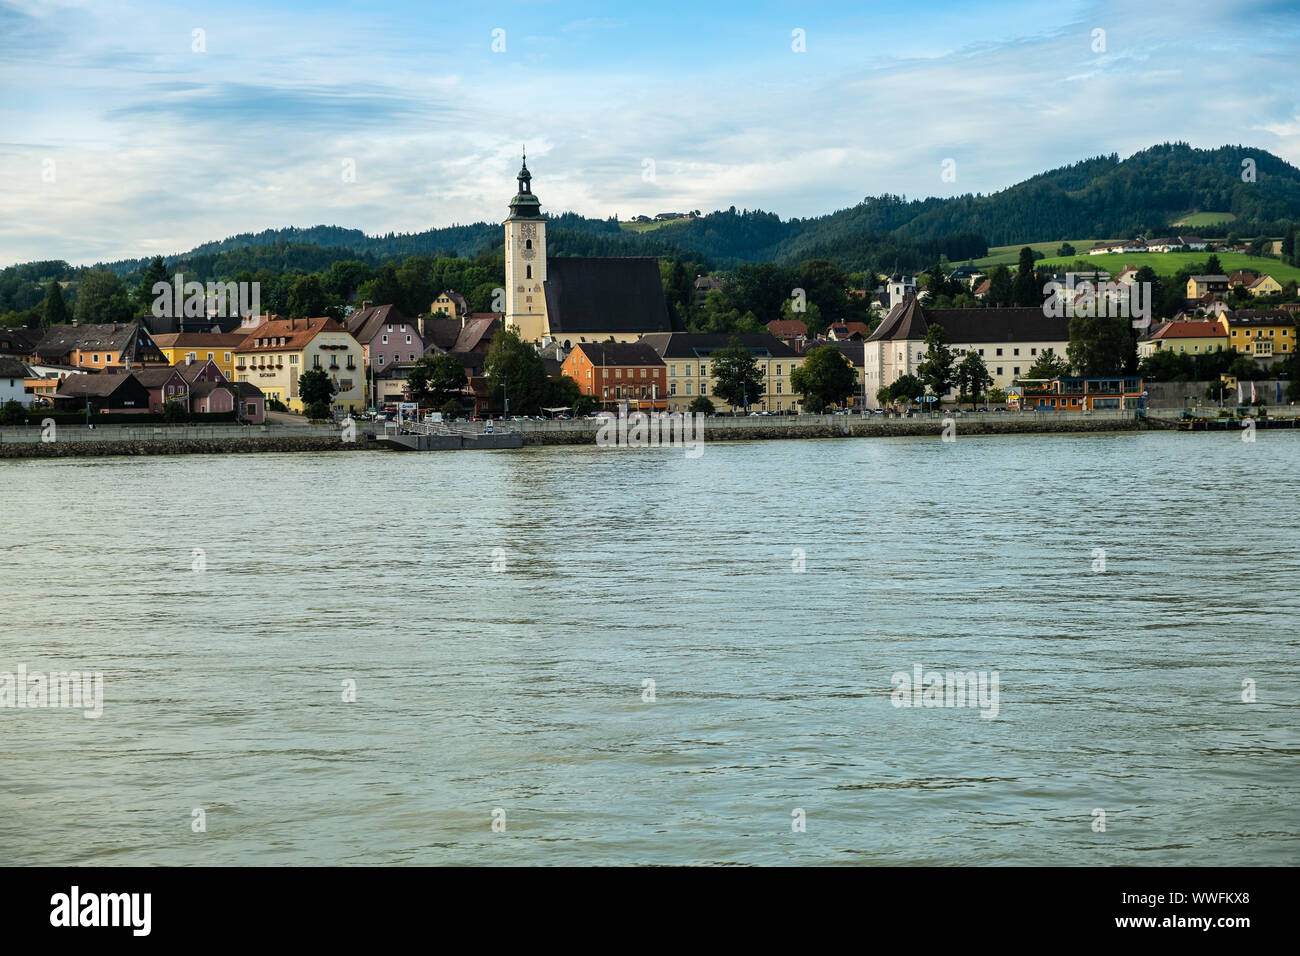 The village of Grein on the bank of the Danube, Austria Stock Photo